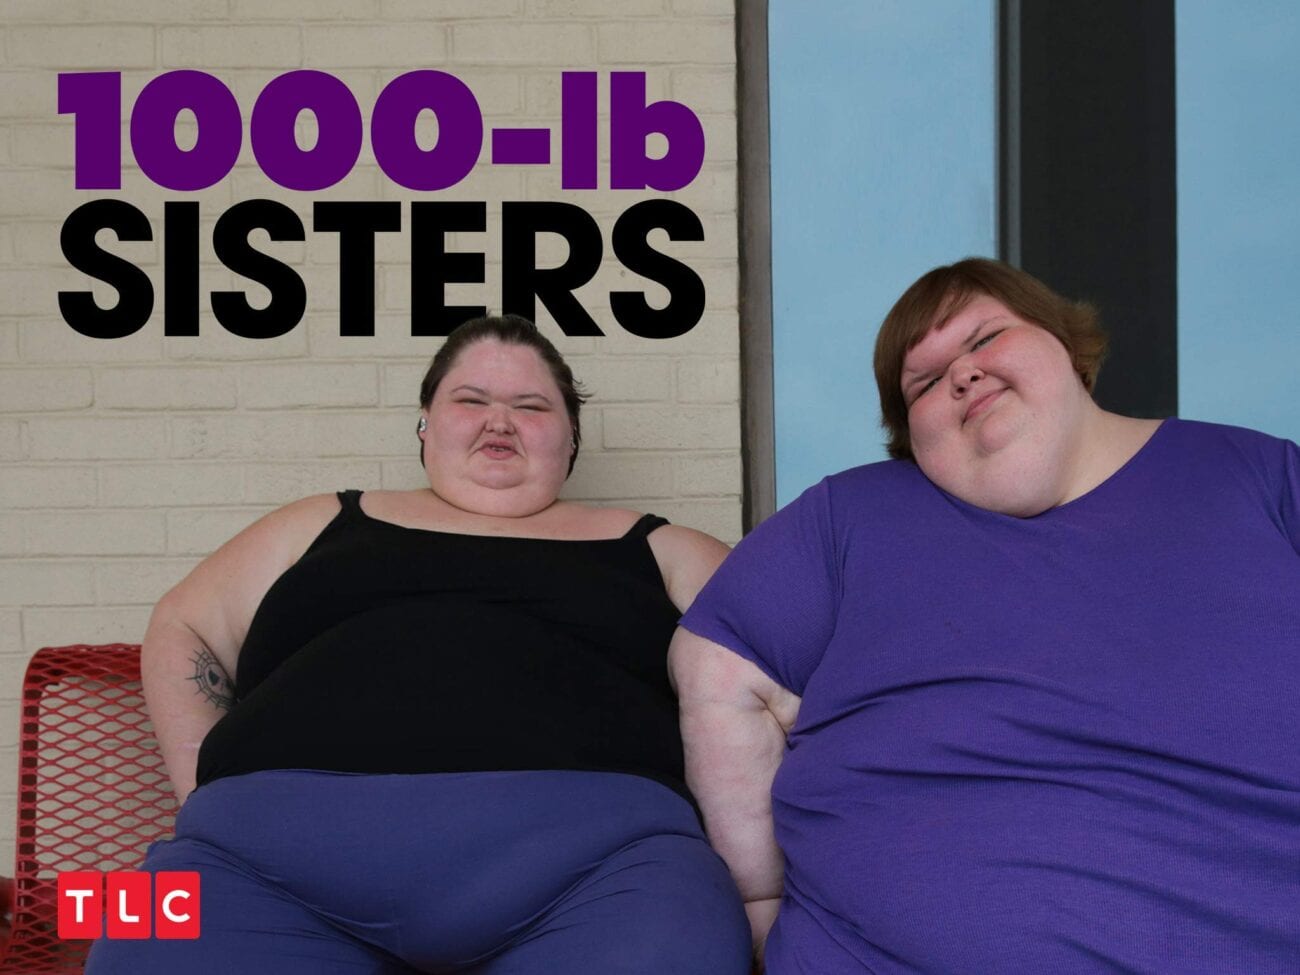 With '1000lb Sisters' done for now, however, you’re probably looking for excellent programming from TLC to dive into. Here are fan favorites.